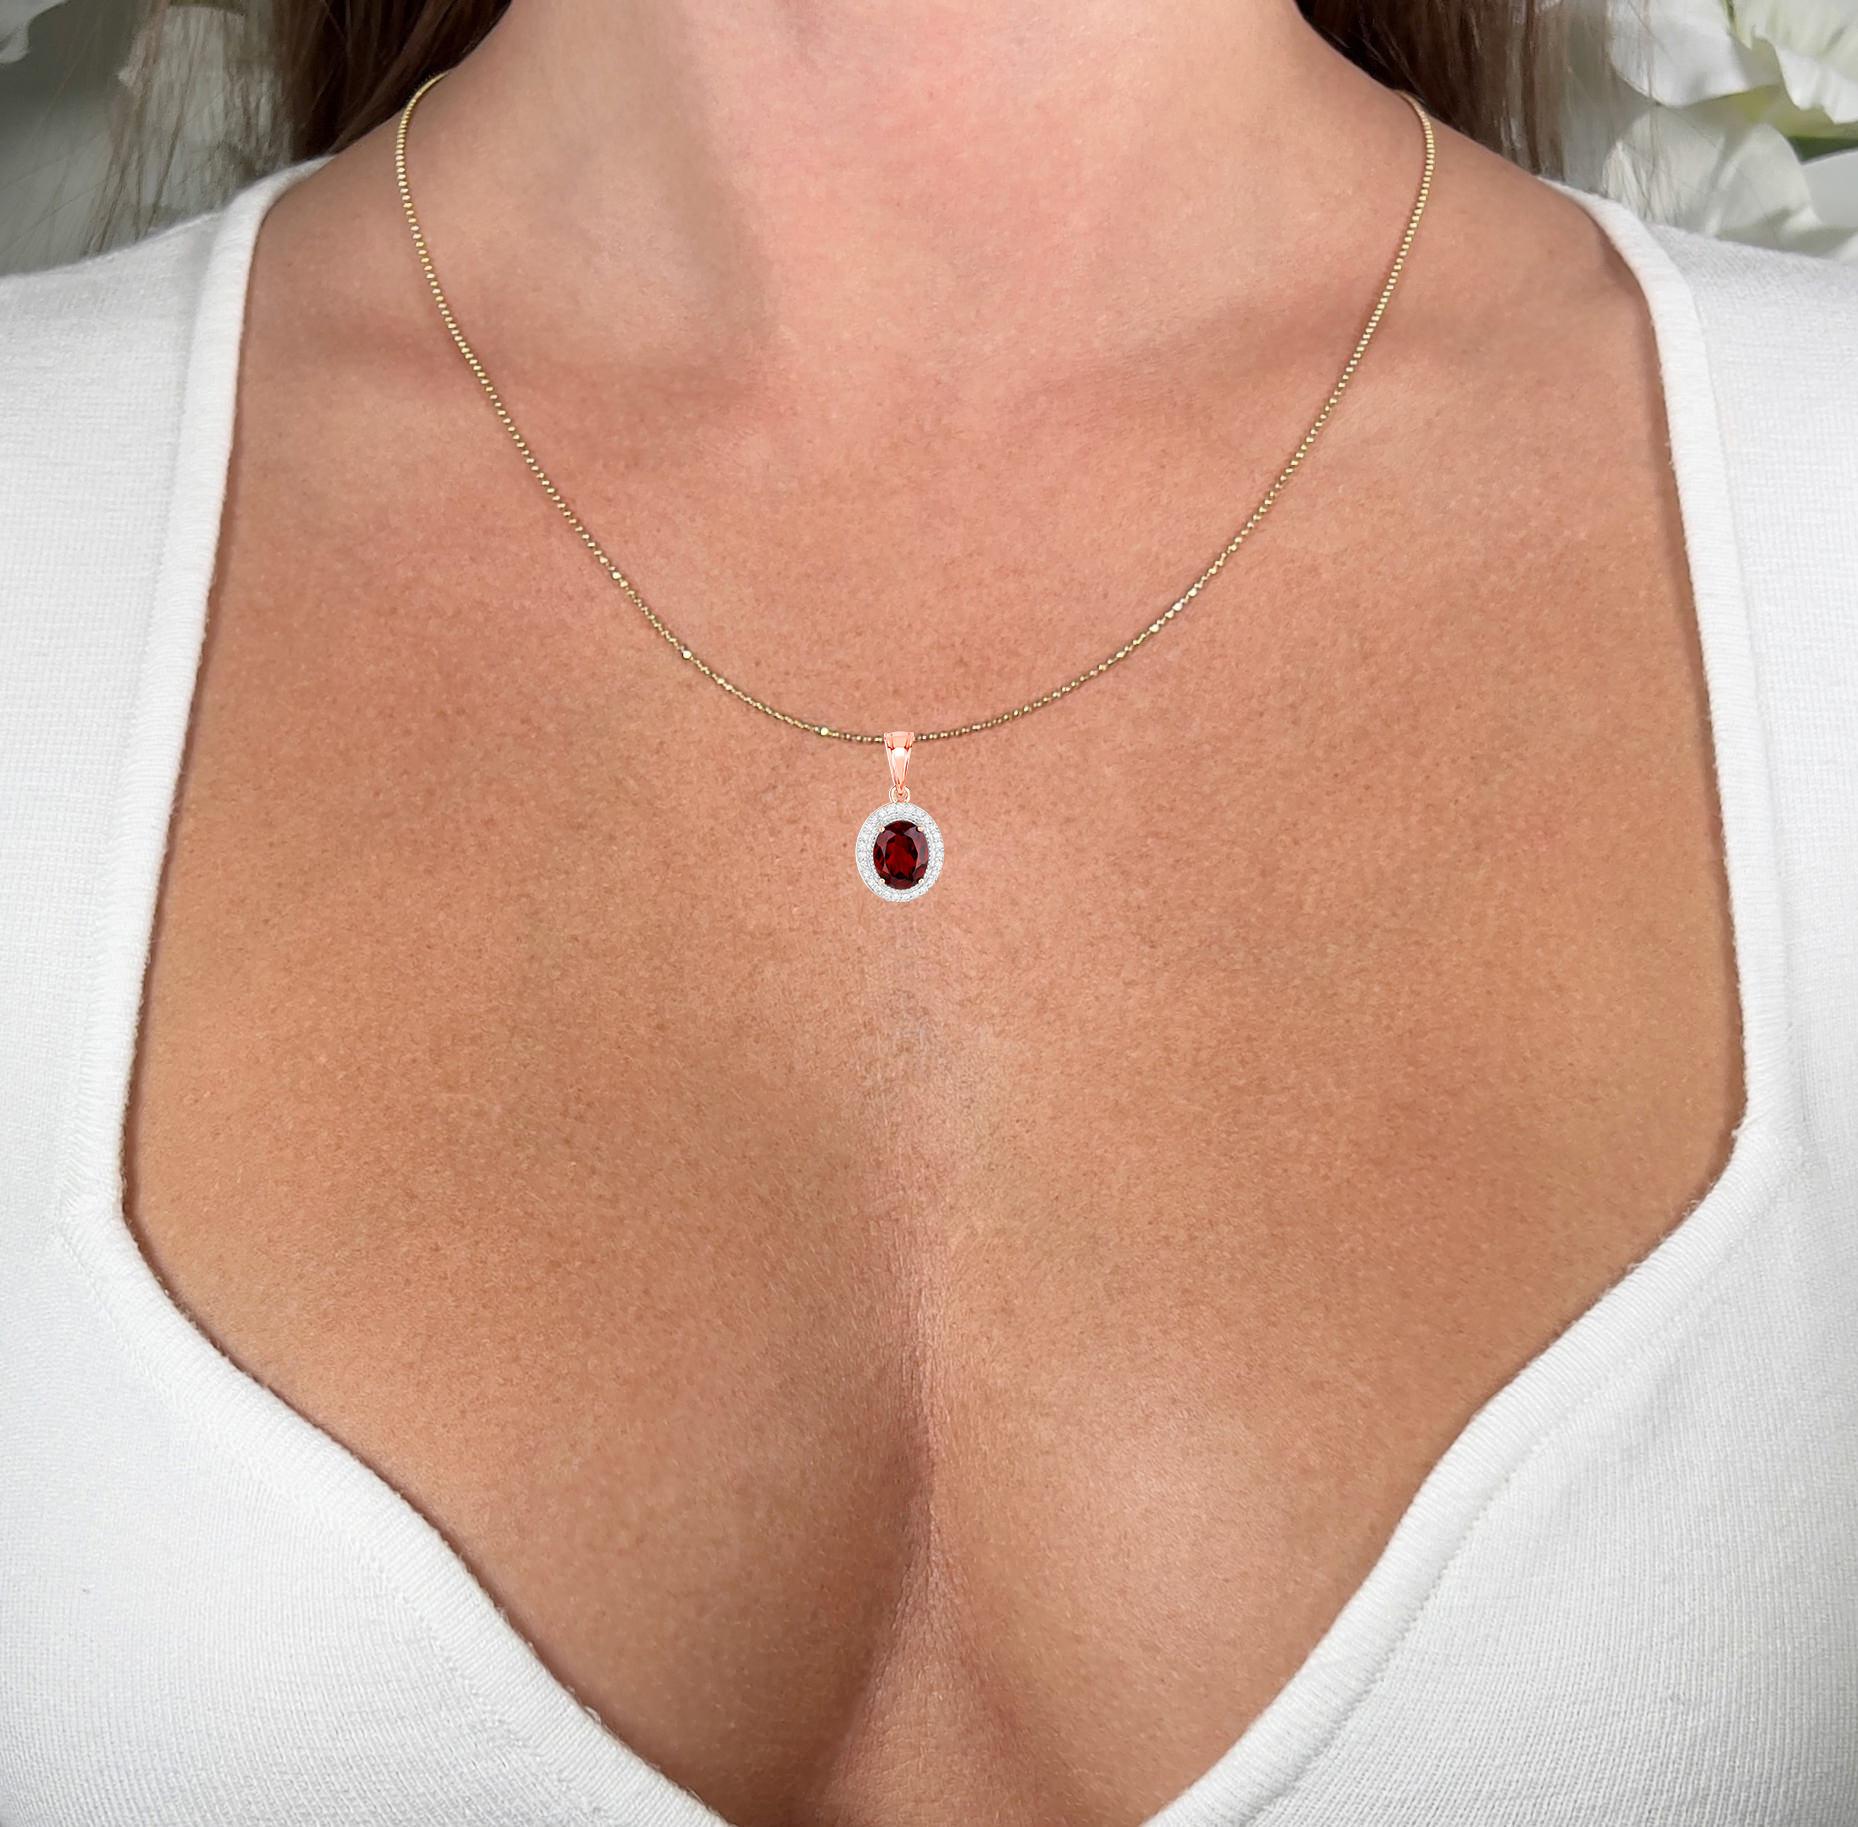 It comes with the Gemological Appraisal by GIA GG/AJP
All Gemstones are Natural
Rhodolite Garnet = 2.73 Carat
27 Diamonds = 0.22 Carats
Metal: 14K Rose Gold
Pendant Dimensions: 24 x 13 mm